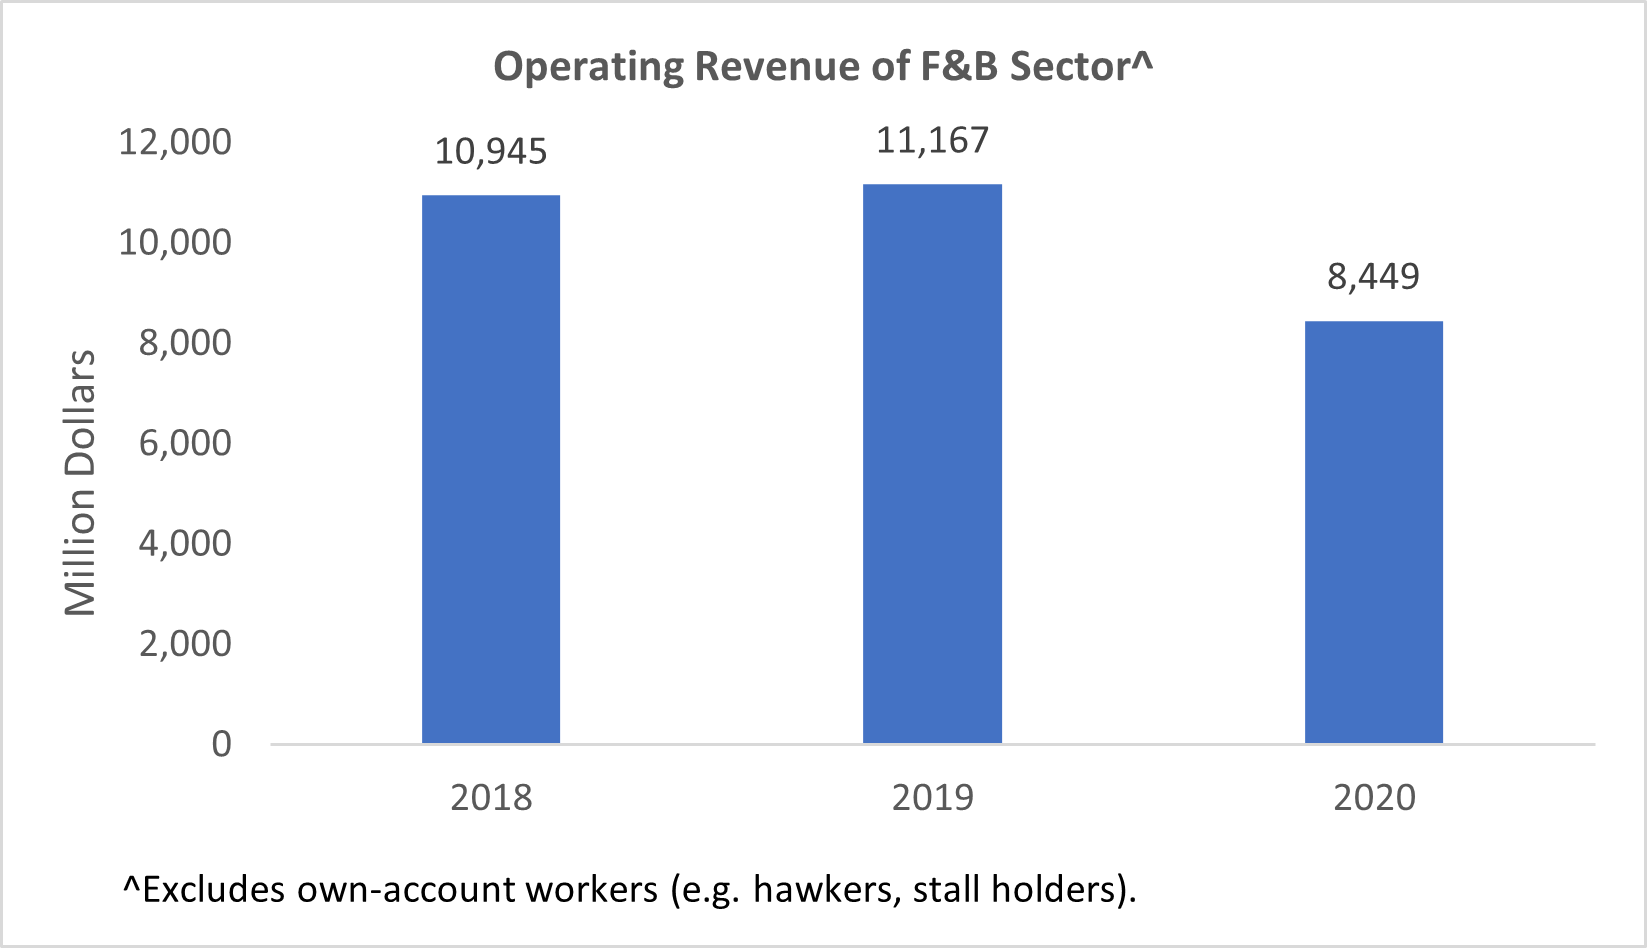 Operating revenue of F&B business from 2018 to 2020